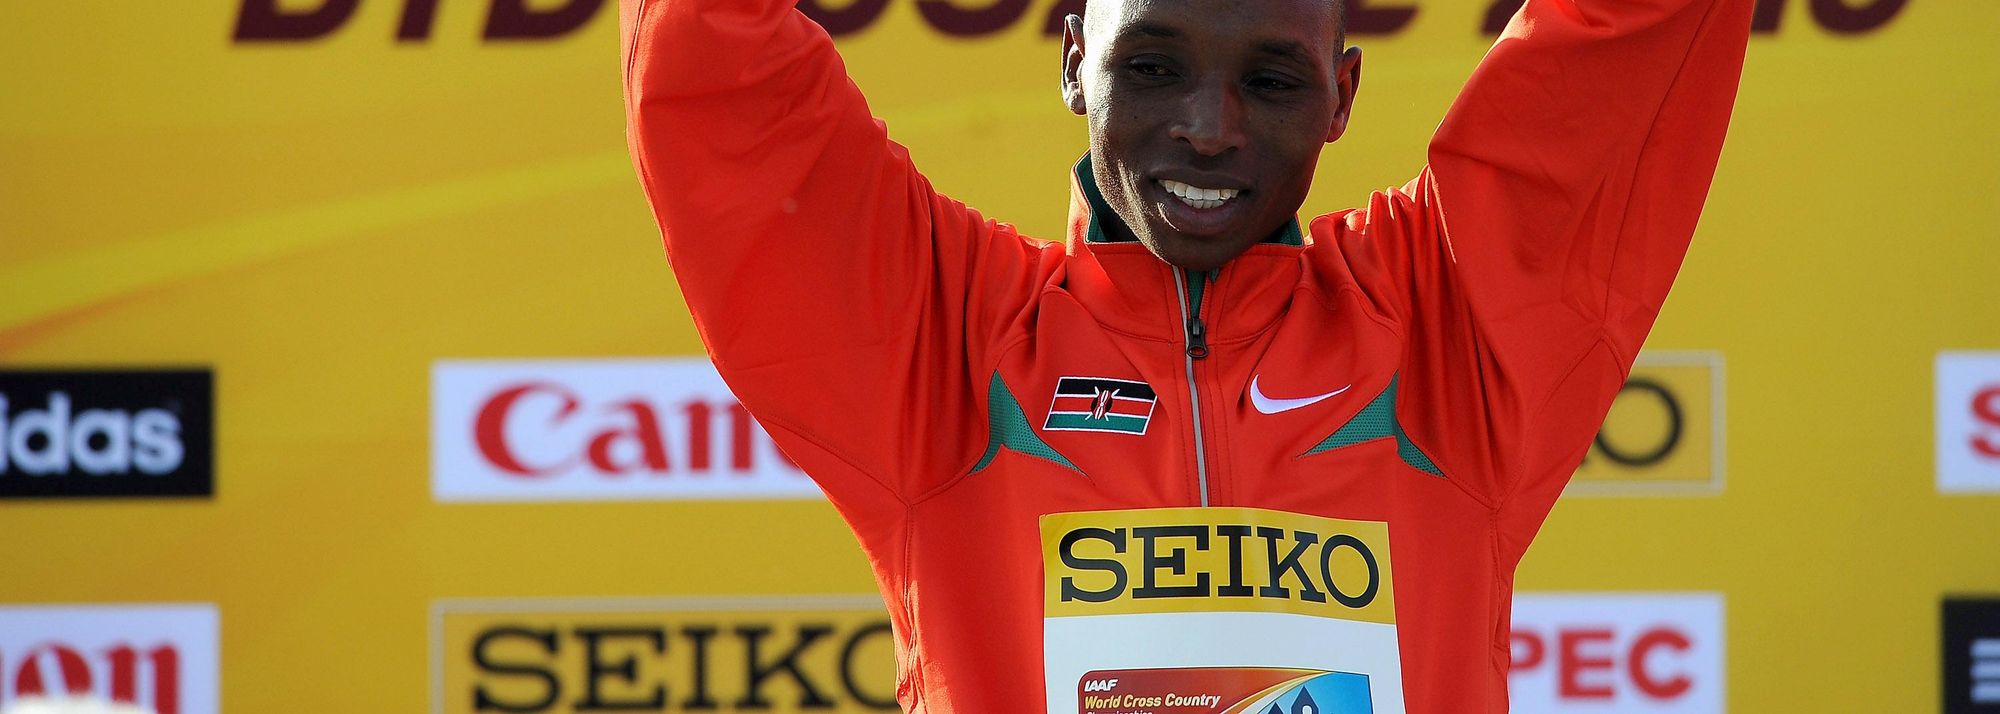 Japhet Korir was blithely unaware that he had become the youngest ever senior men’s champion in the history of the IAAF World Cross Country Championships, when he triumphed in the Polish city of Bydgoszcz on Sunday (24).